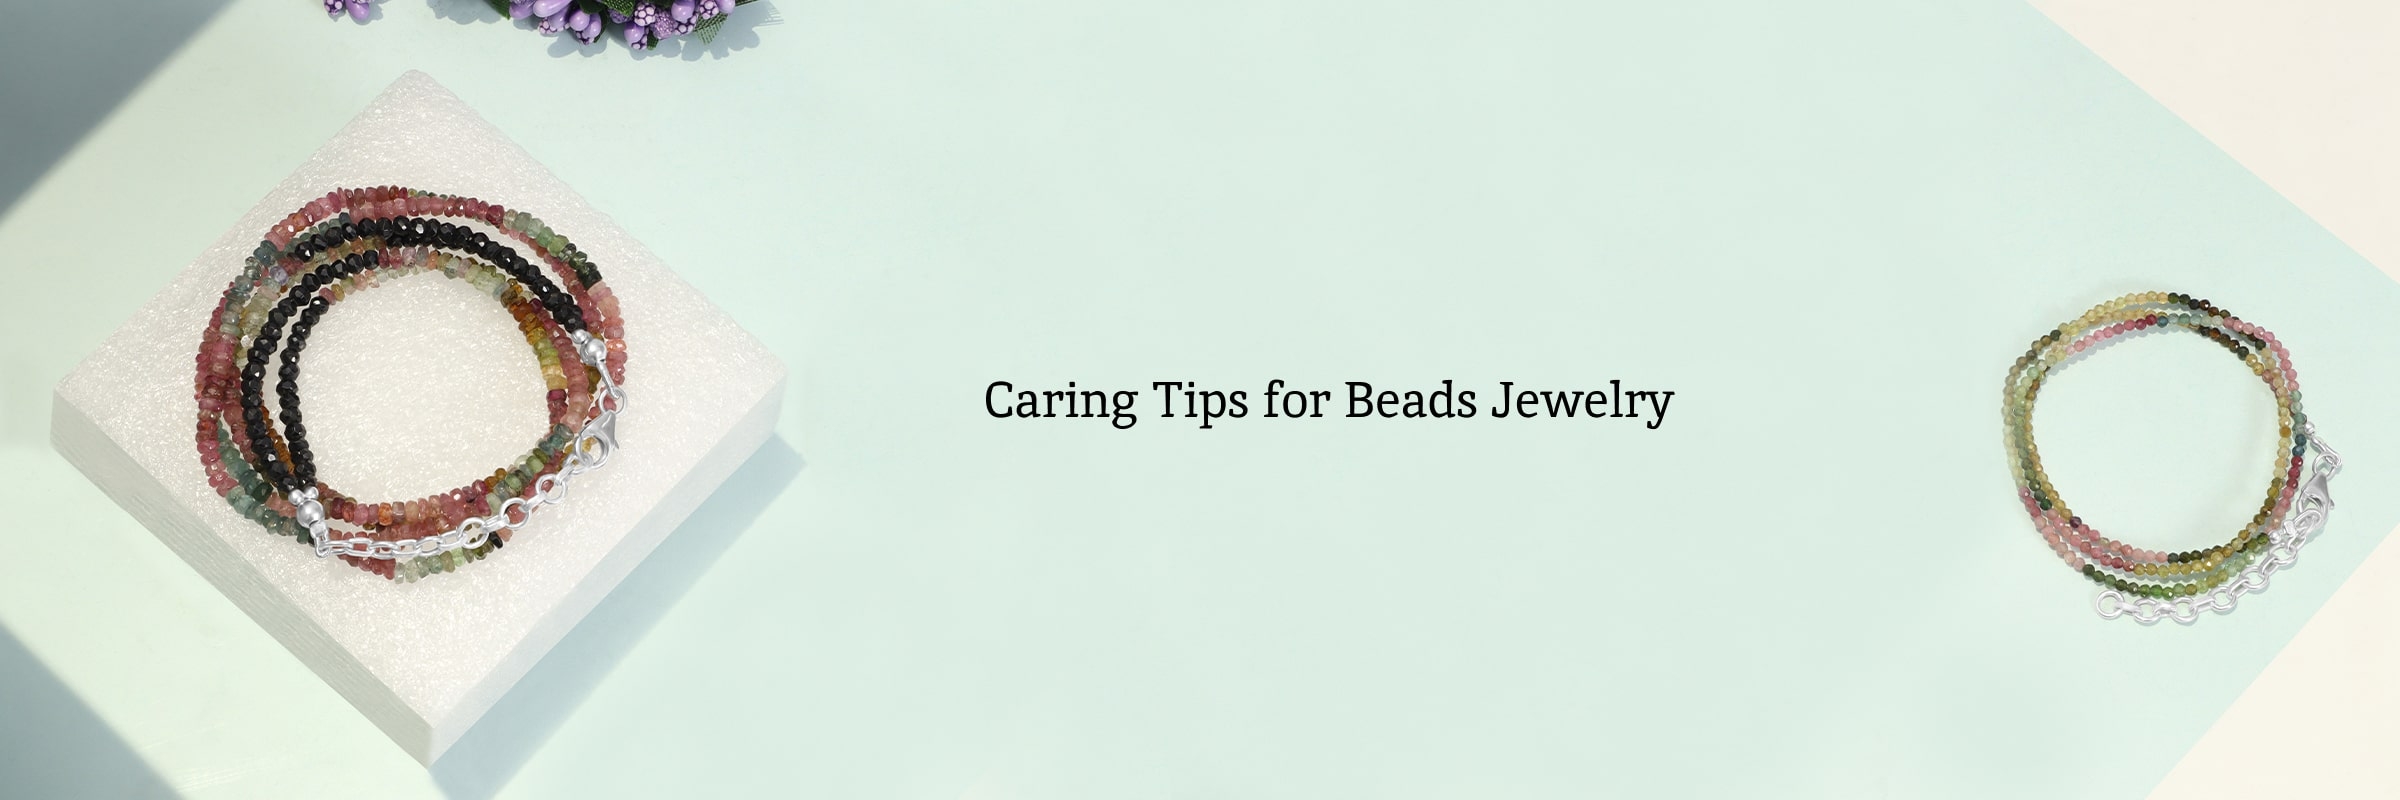 Tips for caring for your beads Jewelry